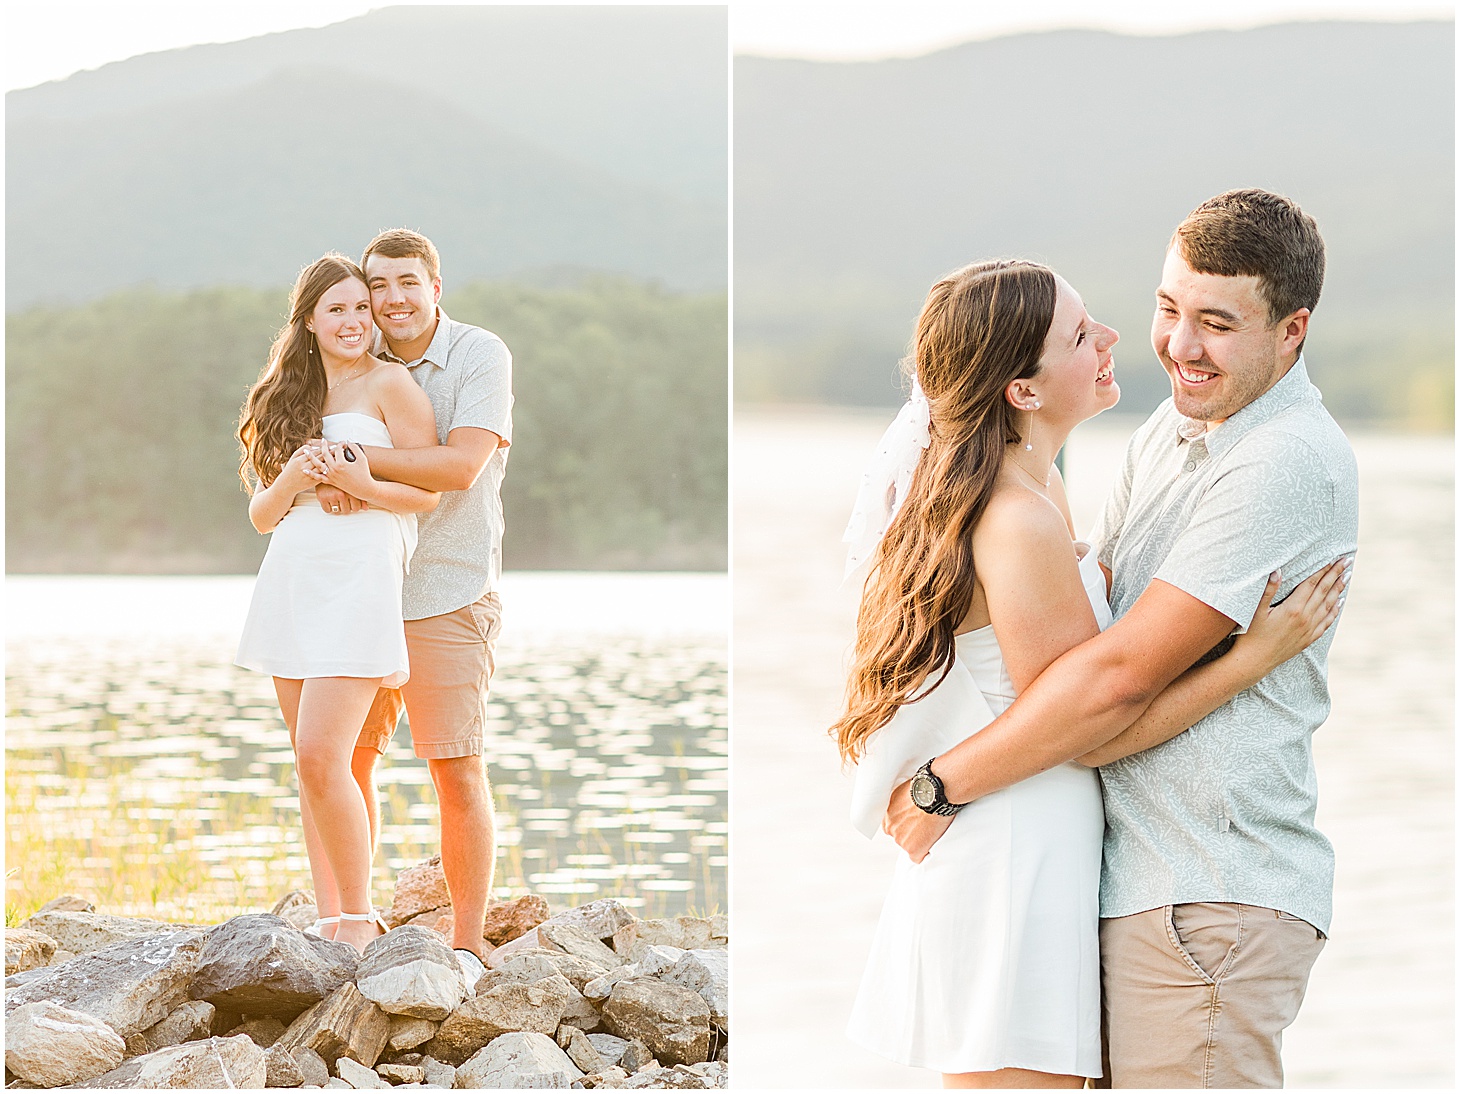 carvinscove_roanokeengagementsession_virginiaweddingphotographer_vaweddingphotographer_photo_0104.jpg